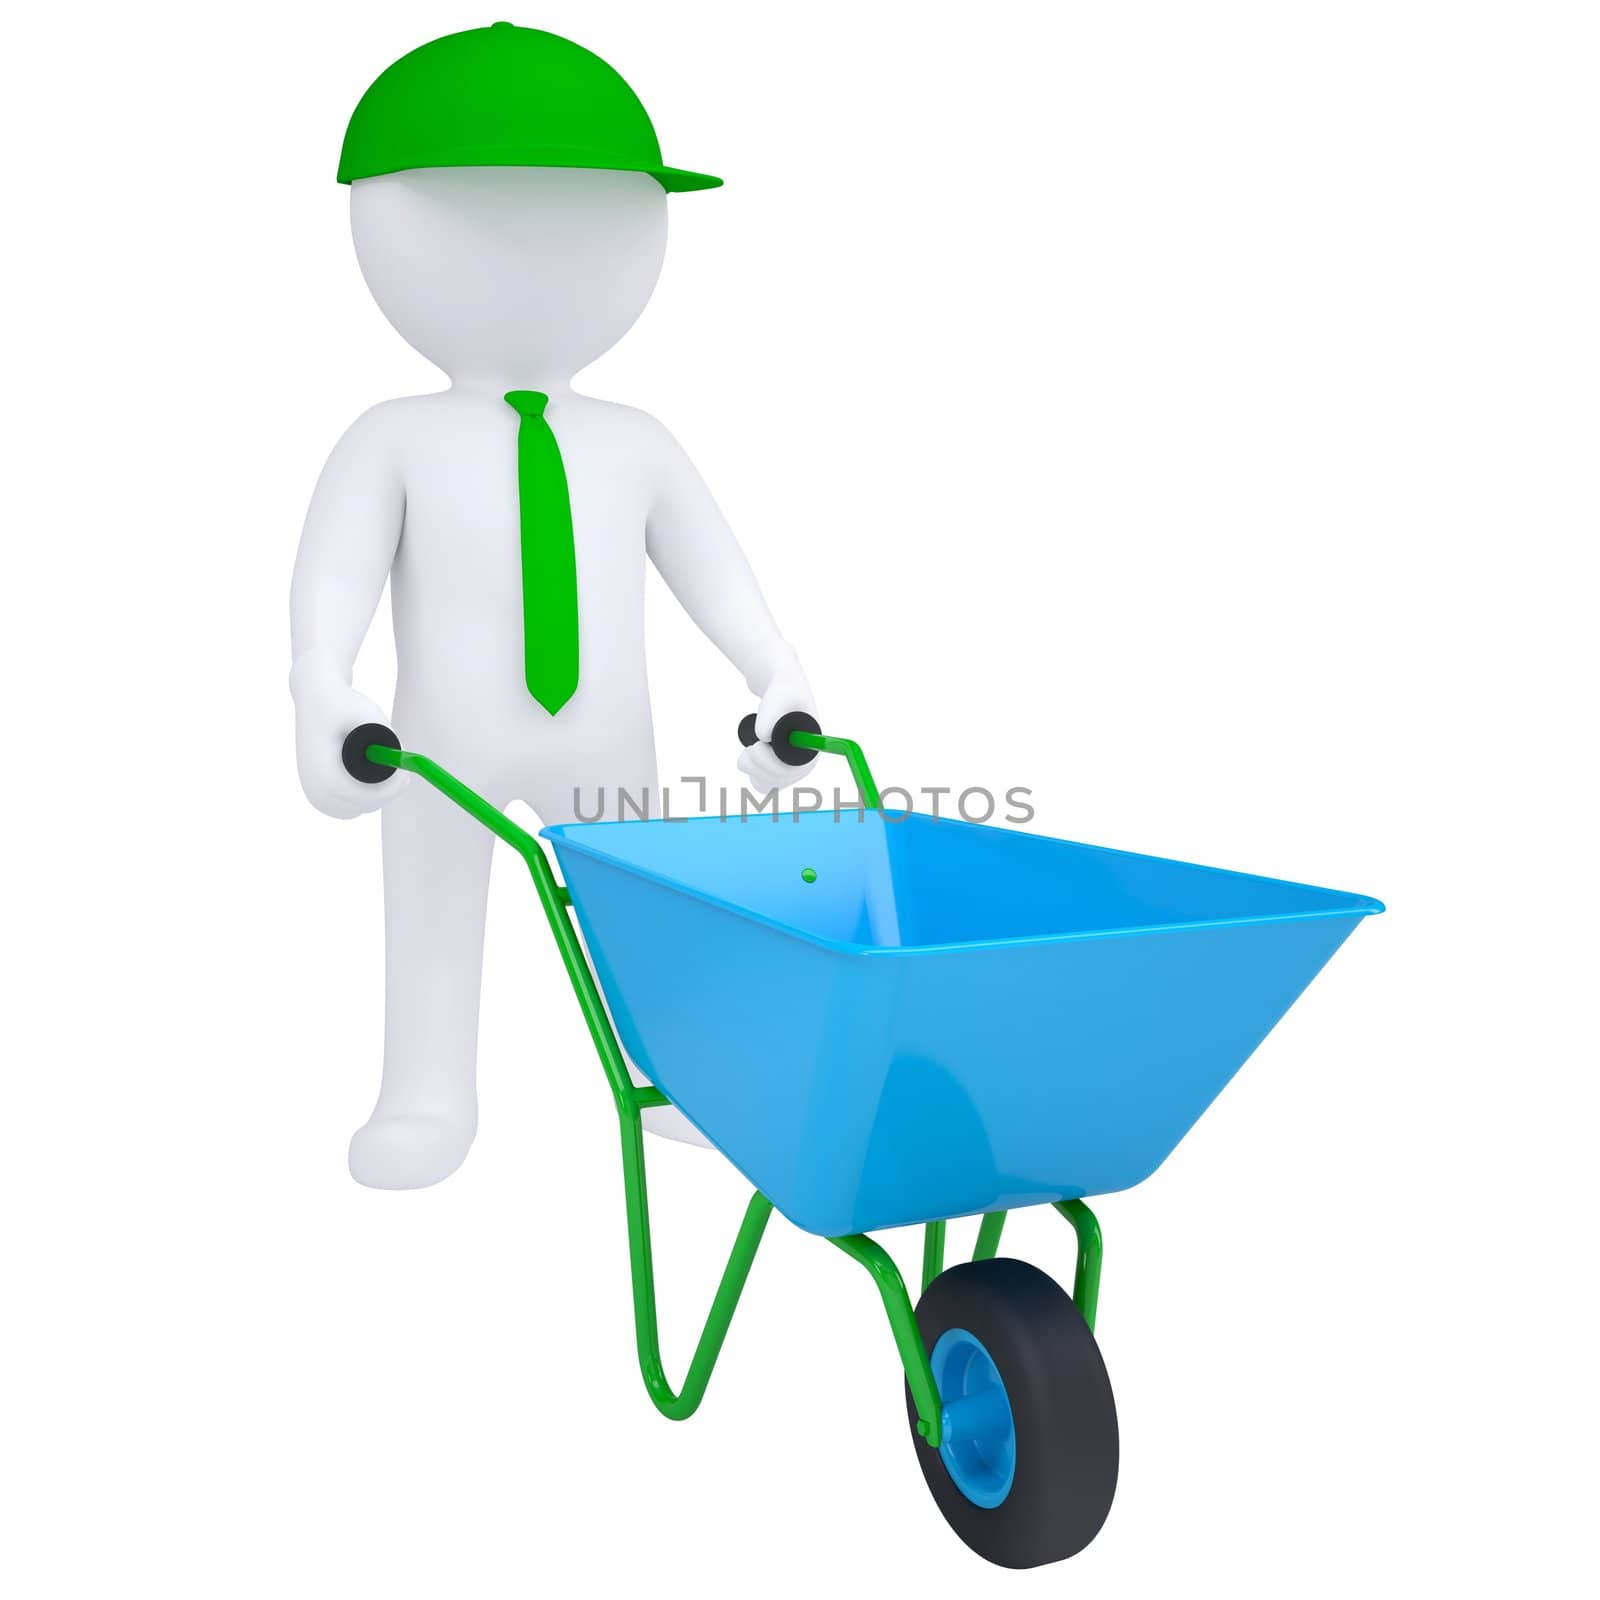 3d white man with a wheelbarrow. Isolated render on a white background